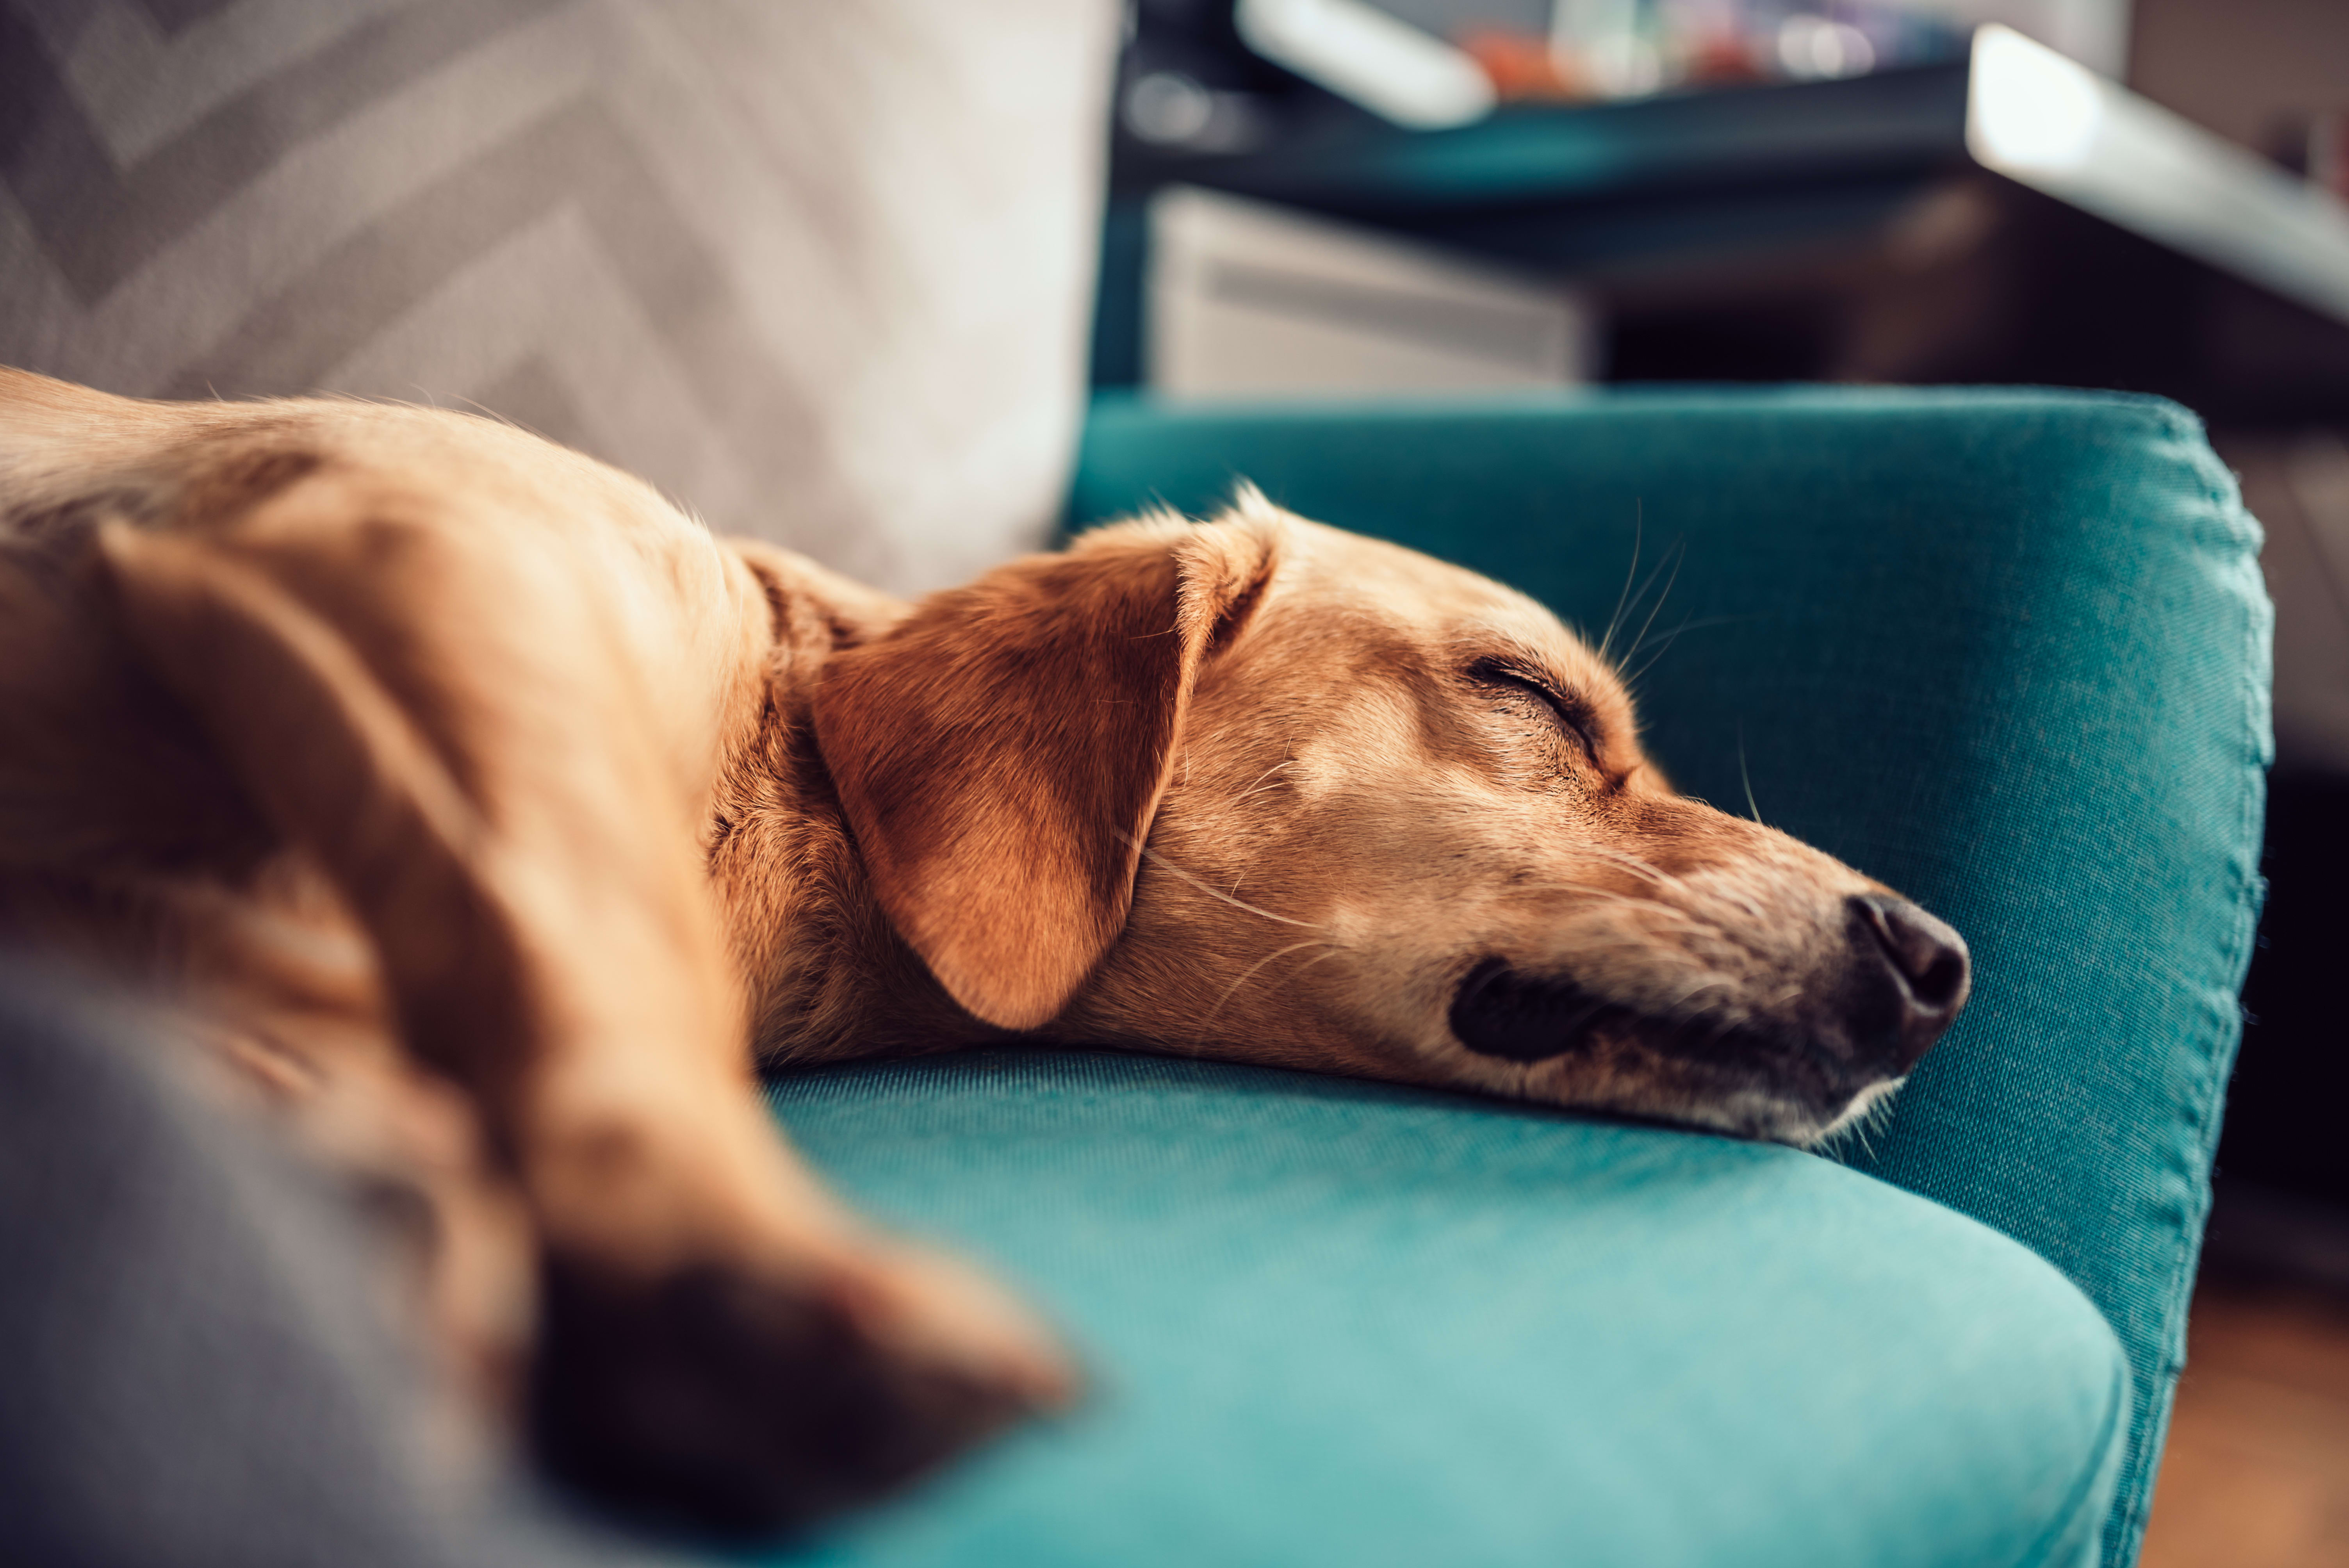 Lack of energy or sleeping lots can be a sign of depression in dogsHunterville vets explain more.